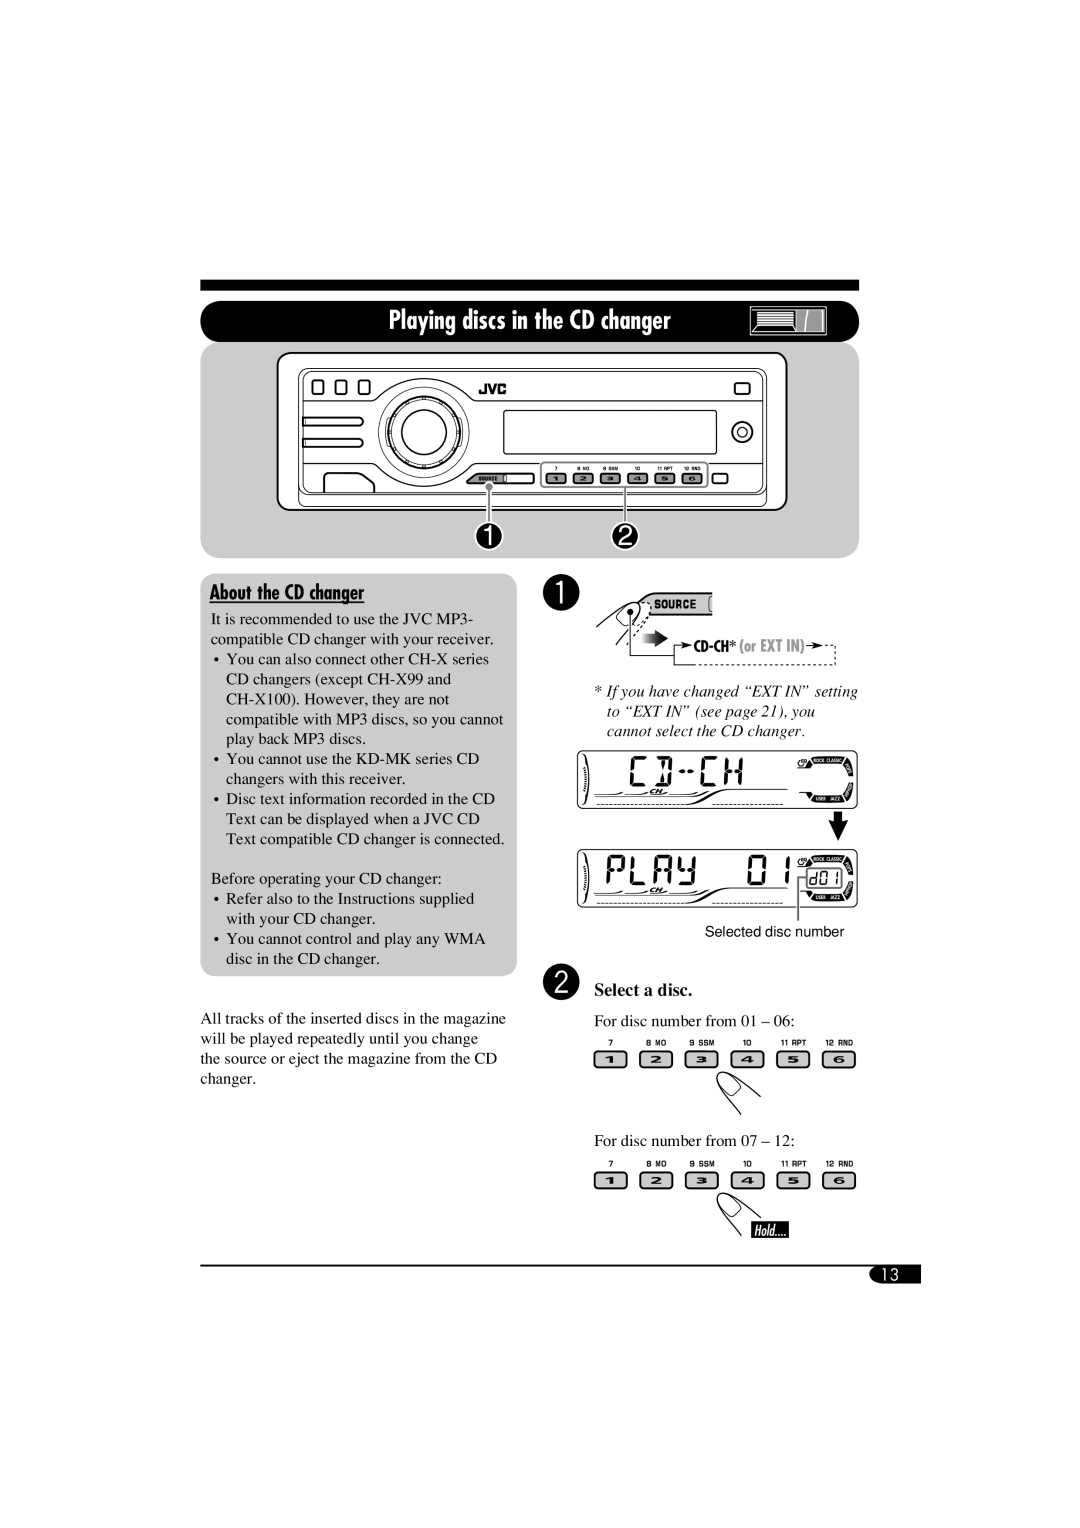 JVC KD-G614, GET0305-001A, KD-G514 manual Playing discs in the CD changer, About the CD changer, Ÿ Select a disc 